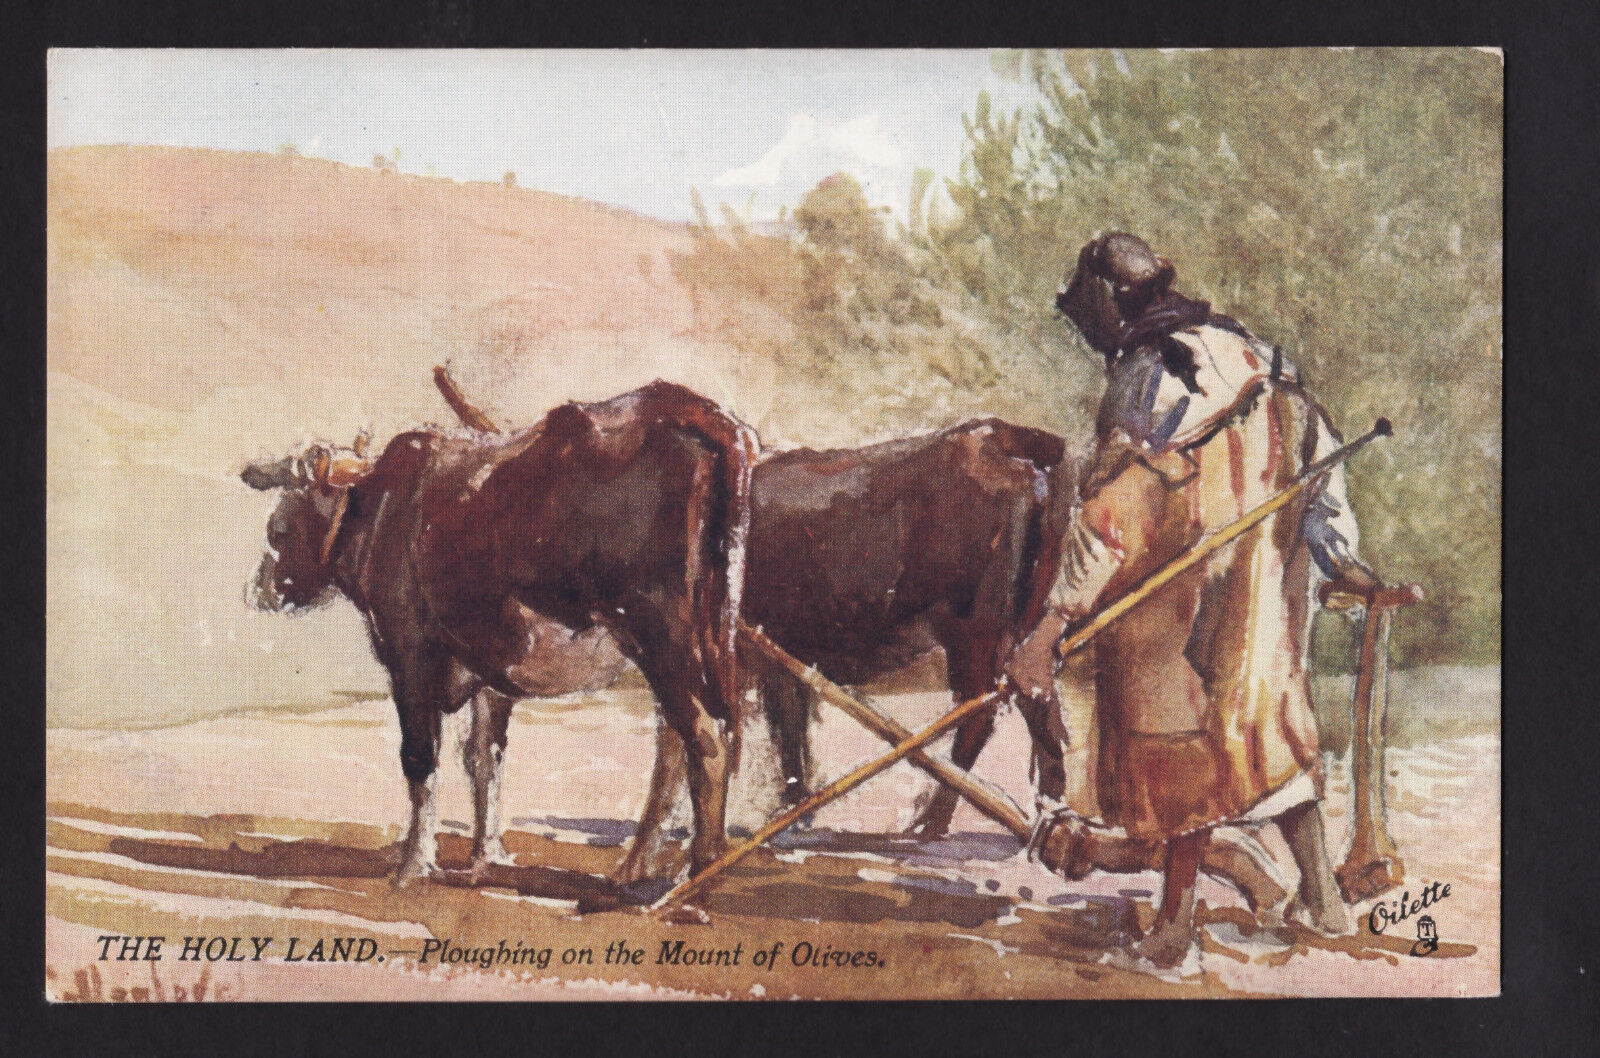 c1910 Tuck The Holy Land plowing on Mount of Olives Israel postcard